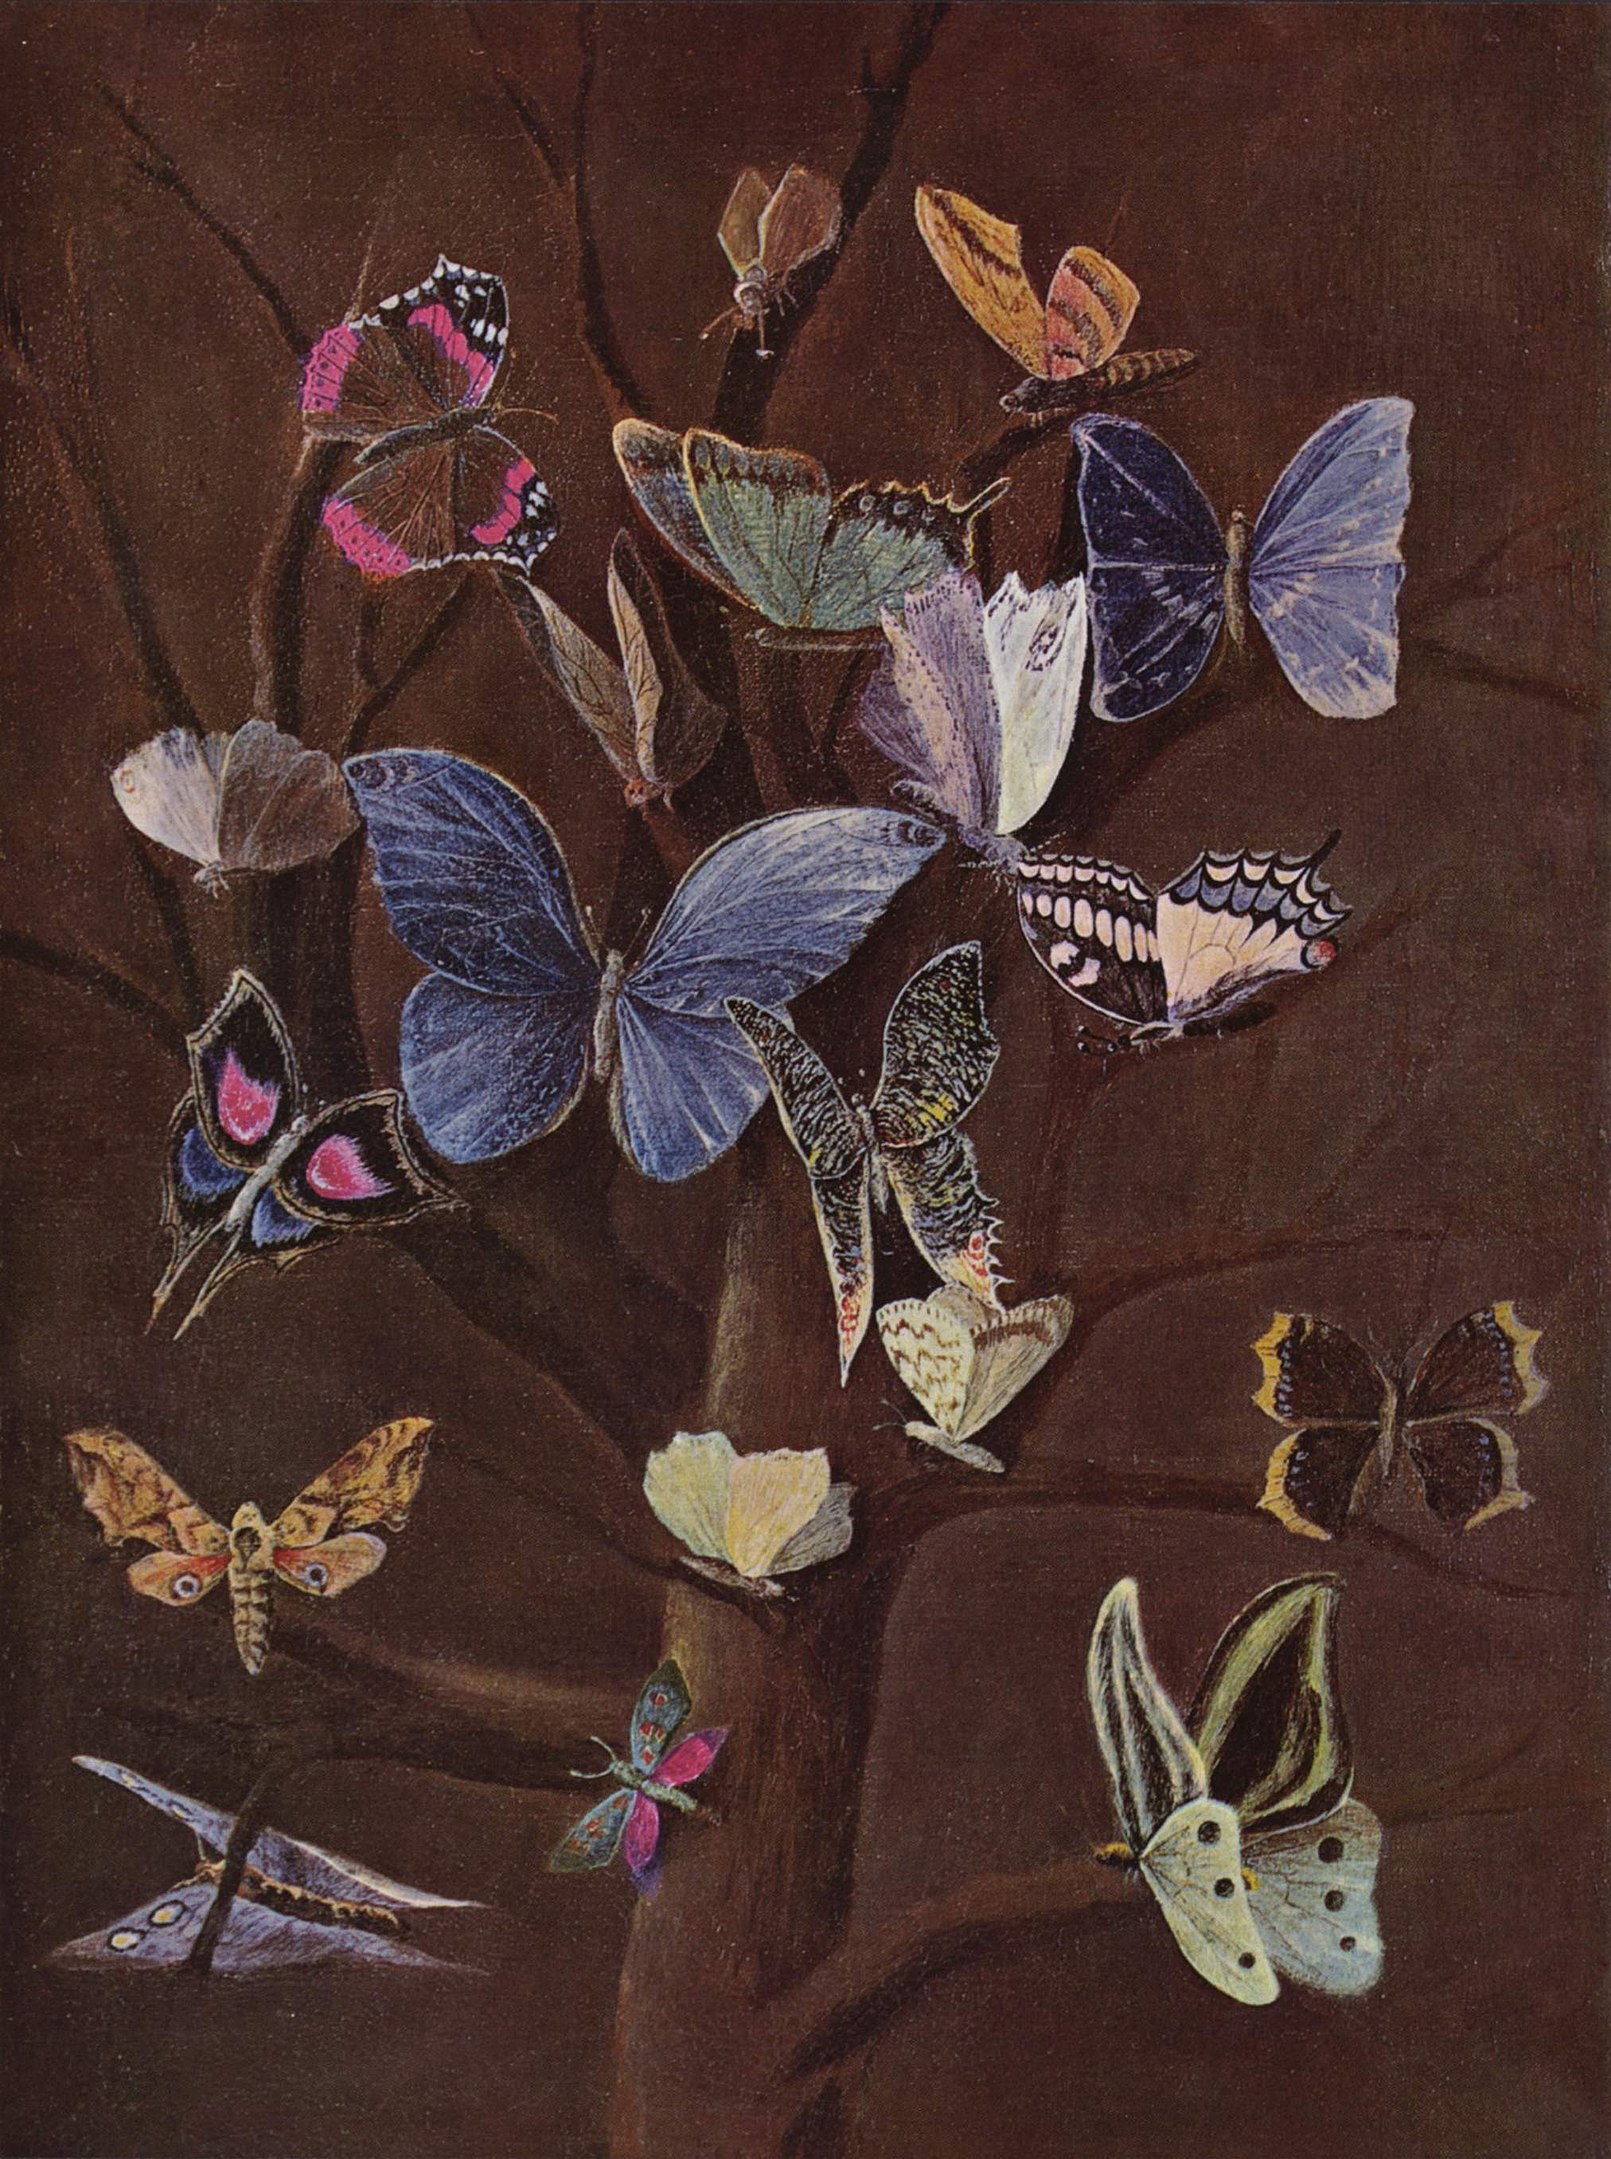 Various butterflies perched on a tree branch against a solid background